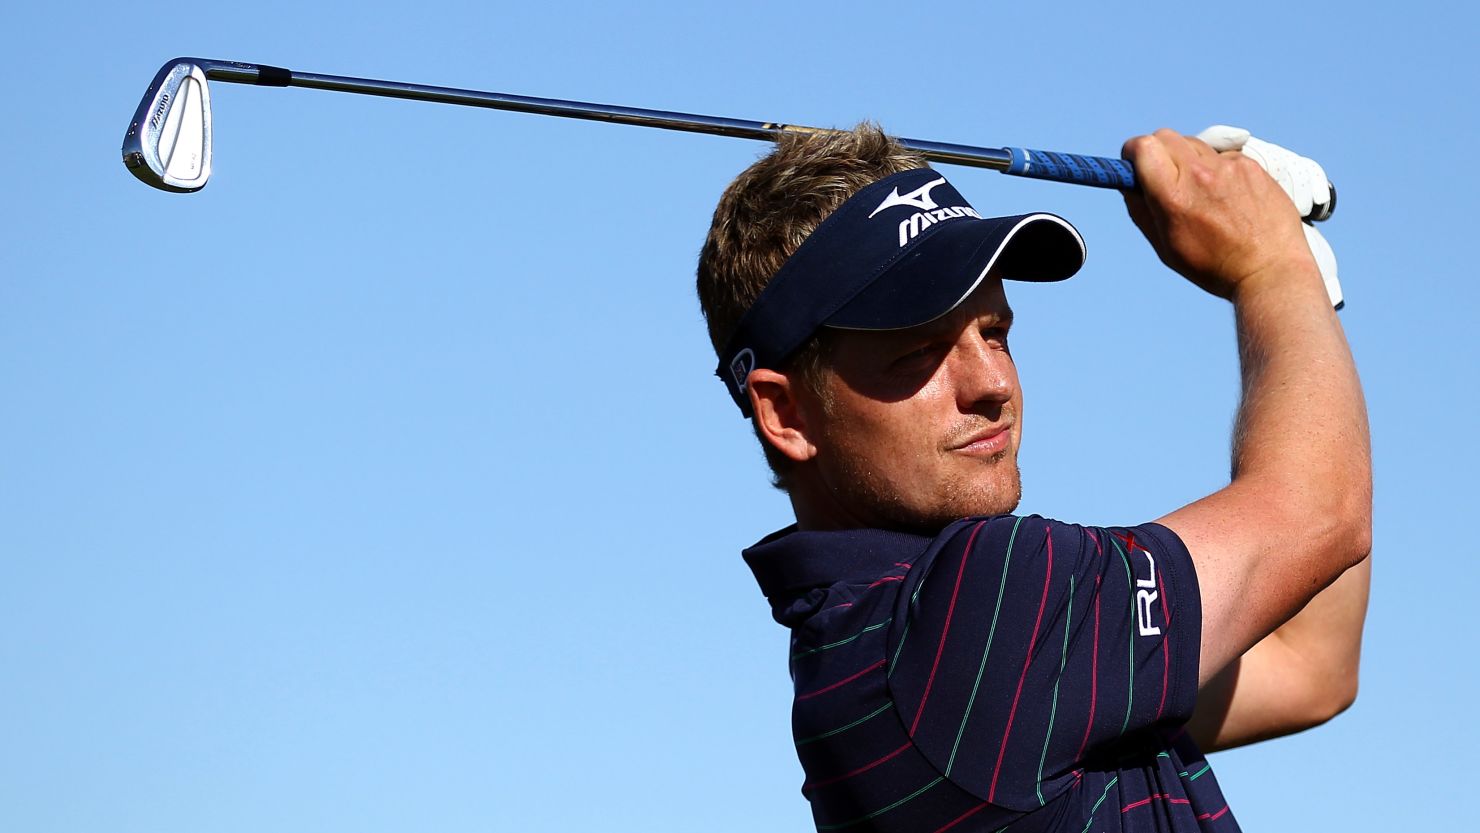 Luke Donald is seeking to become the first golfer to top the European and U.S. money lists in the same season.